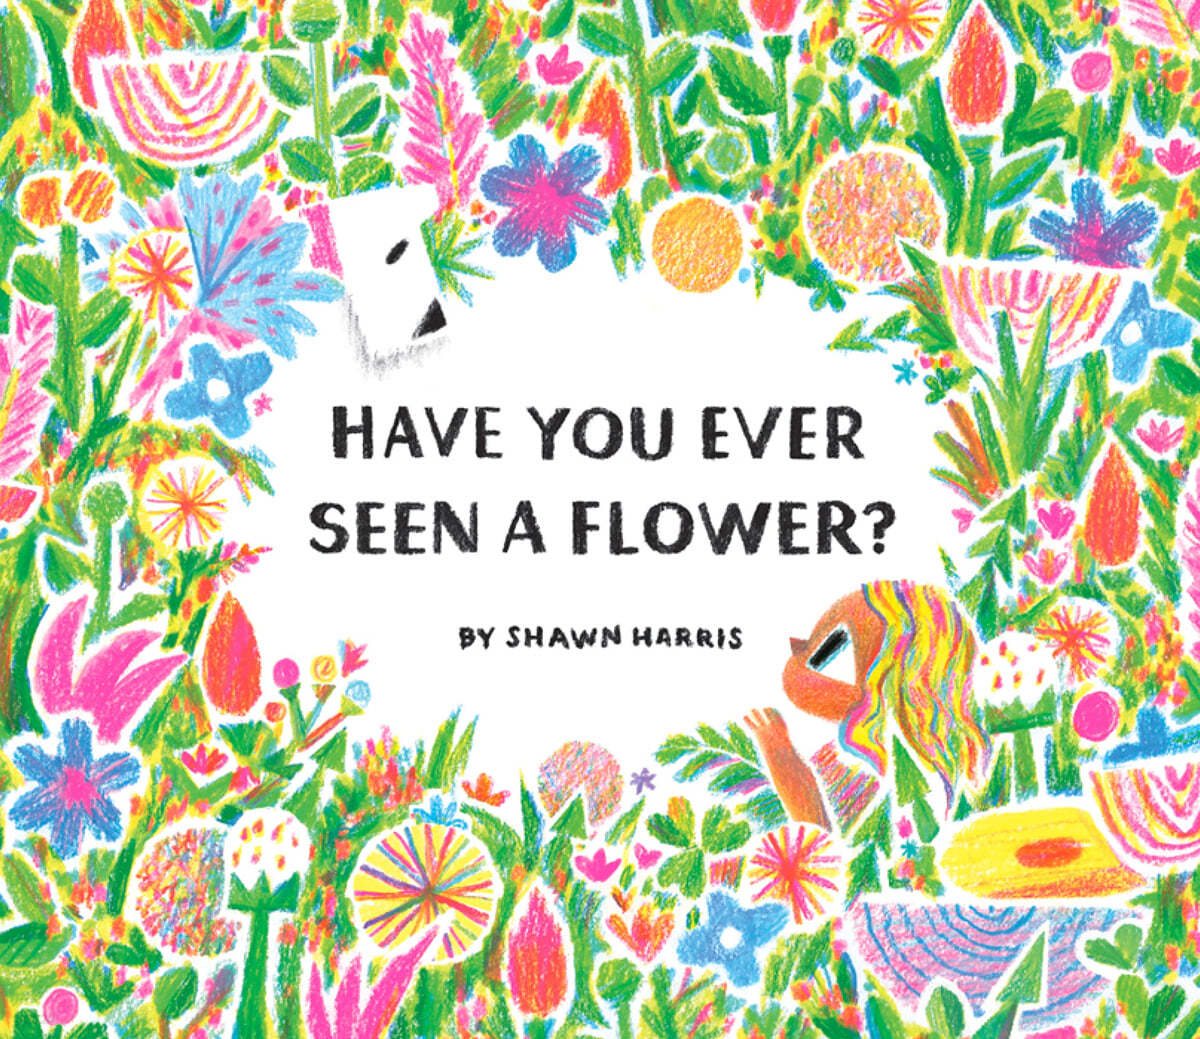 Have You Ever Seen a Flower? : 2022 칼데콧 아너 수상작